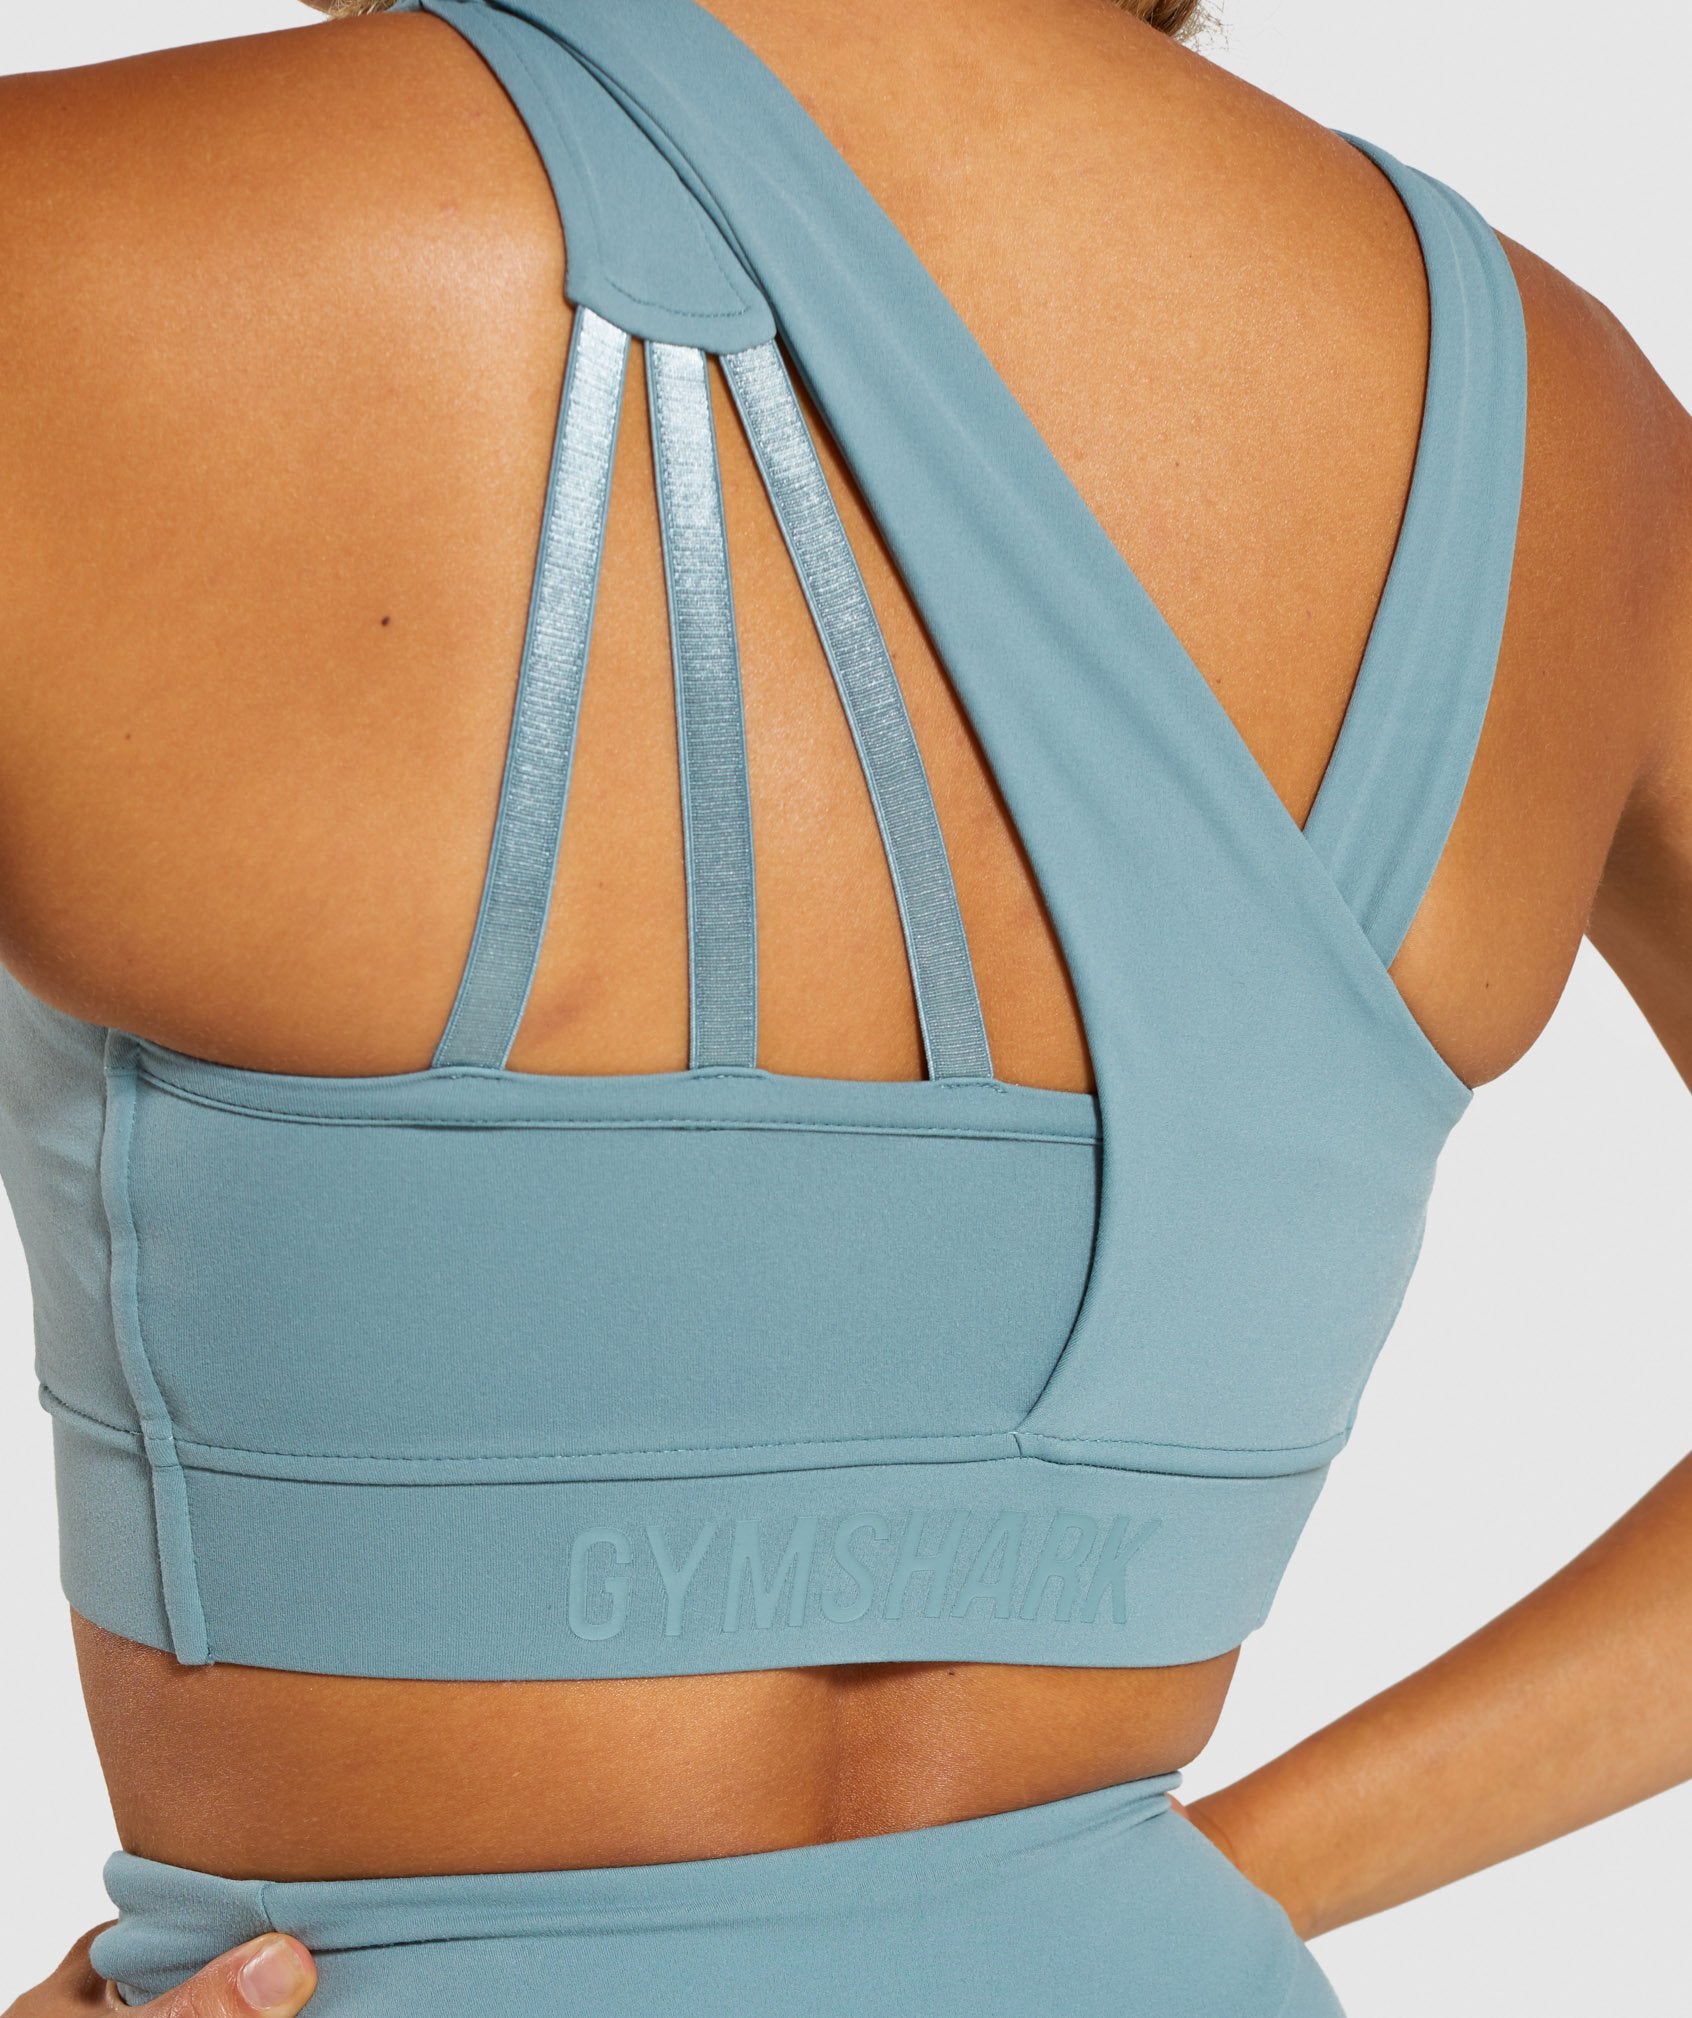 Captivate Sports Bra in Turquoise